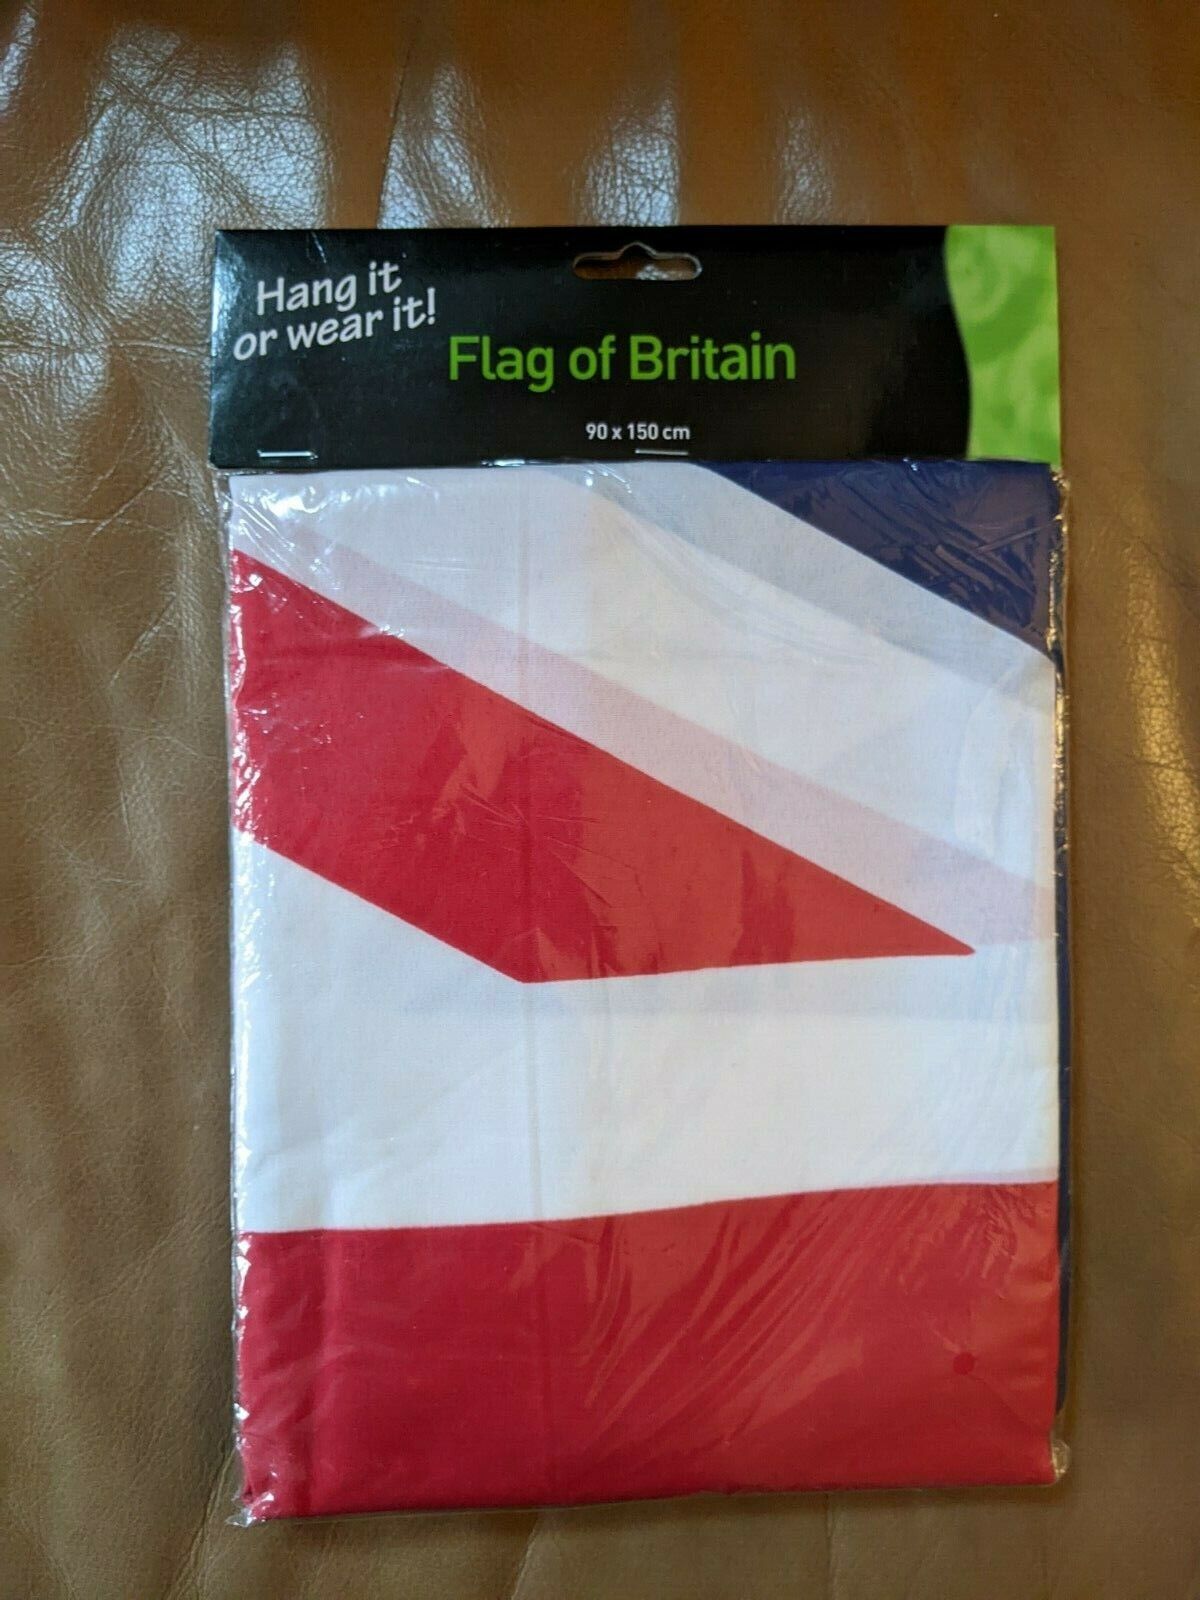 Flag of Britain 90 X 150 cm (approx. 35 X 59 inches) Hang or Wear New in Package